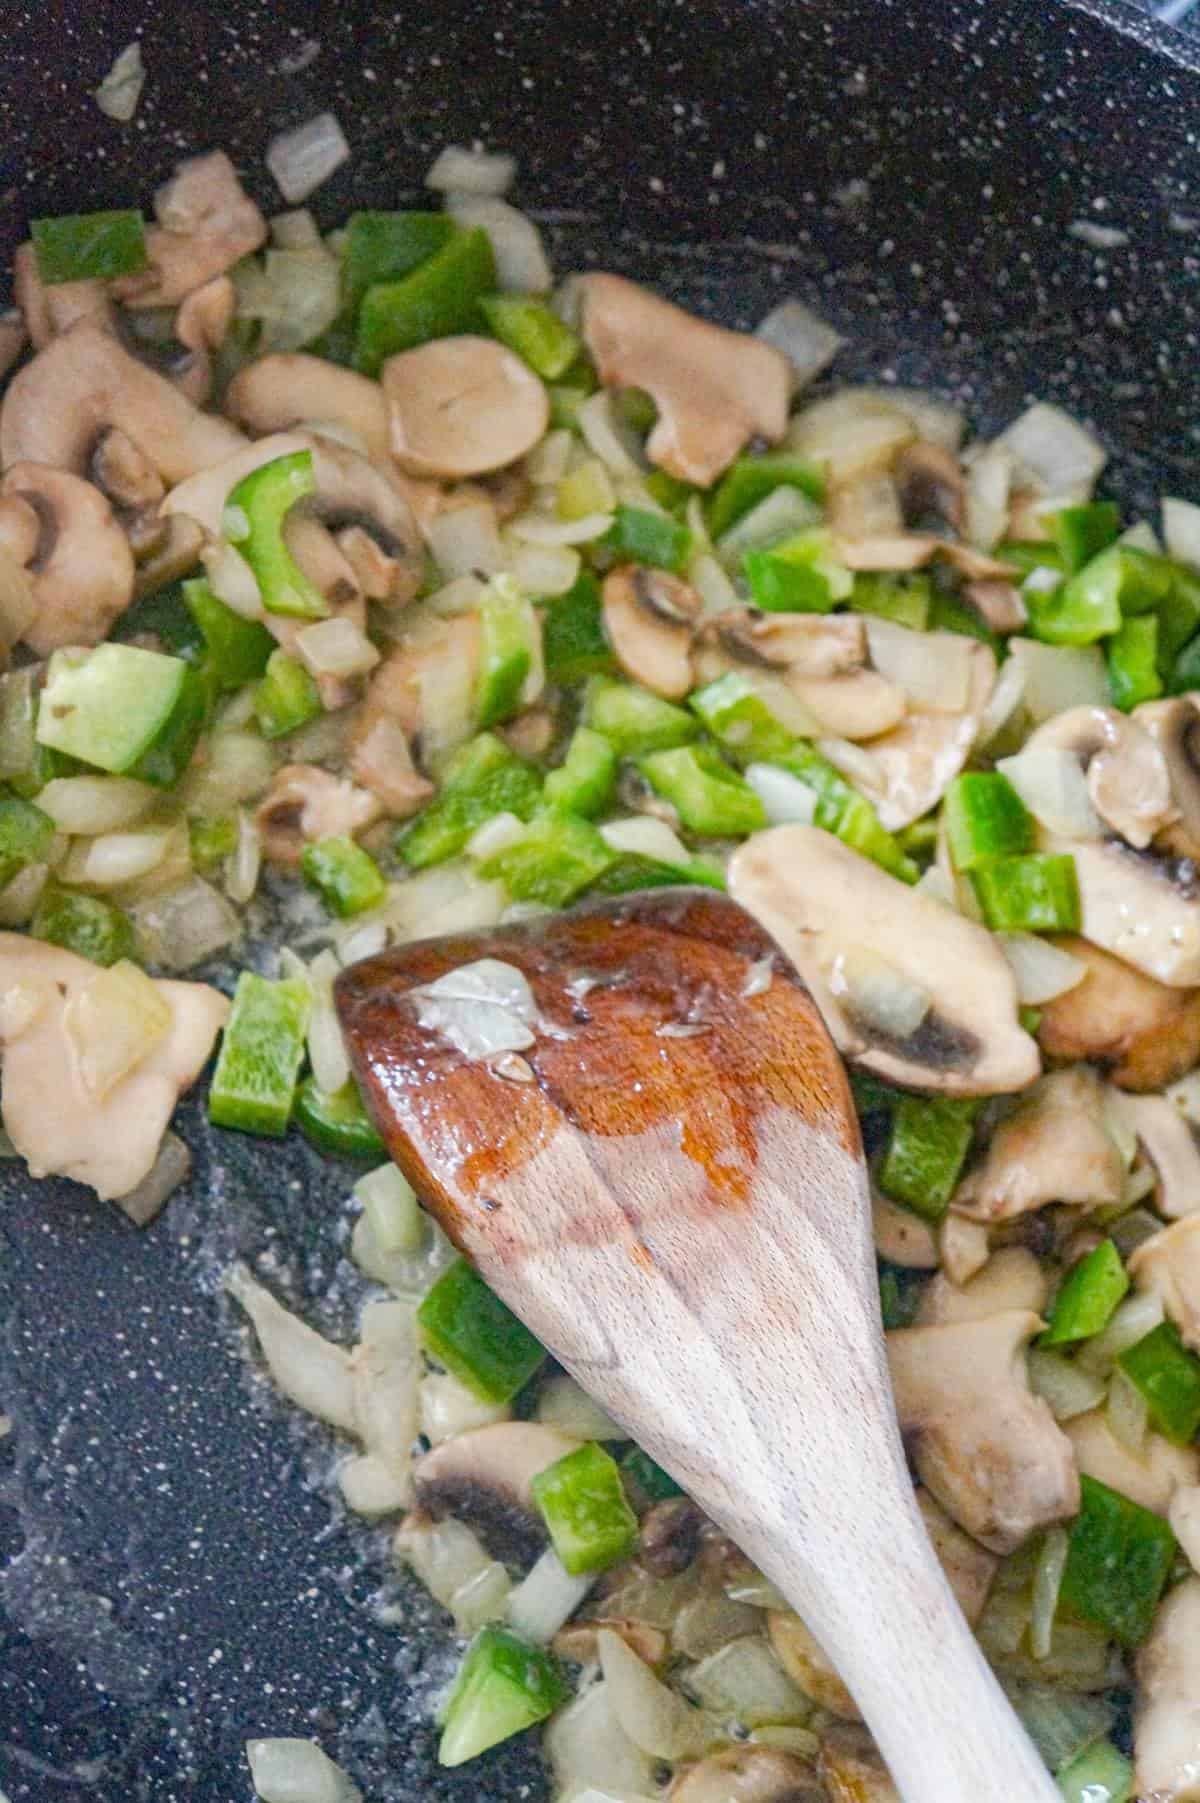 sliced mushrooms, diced onions and diced green peppers cooking in a saute pan